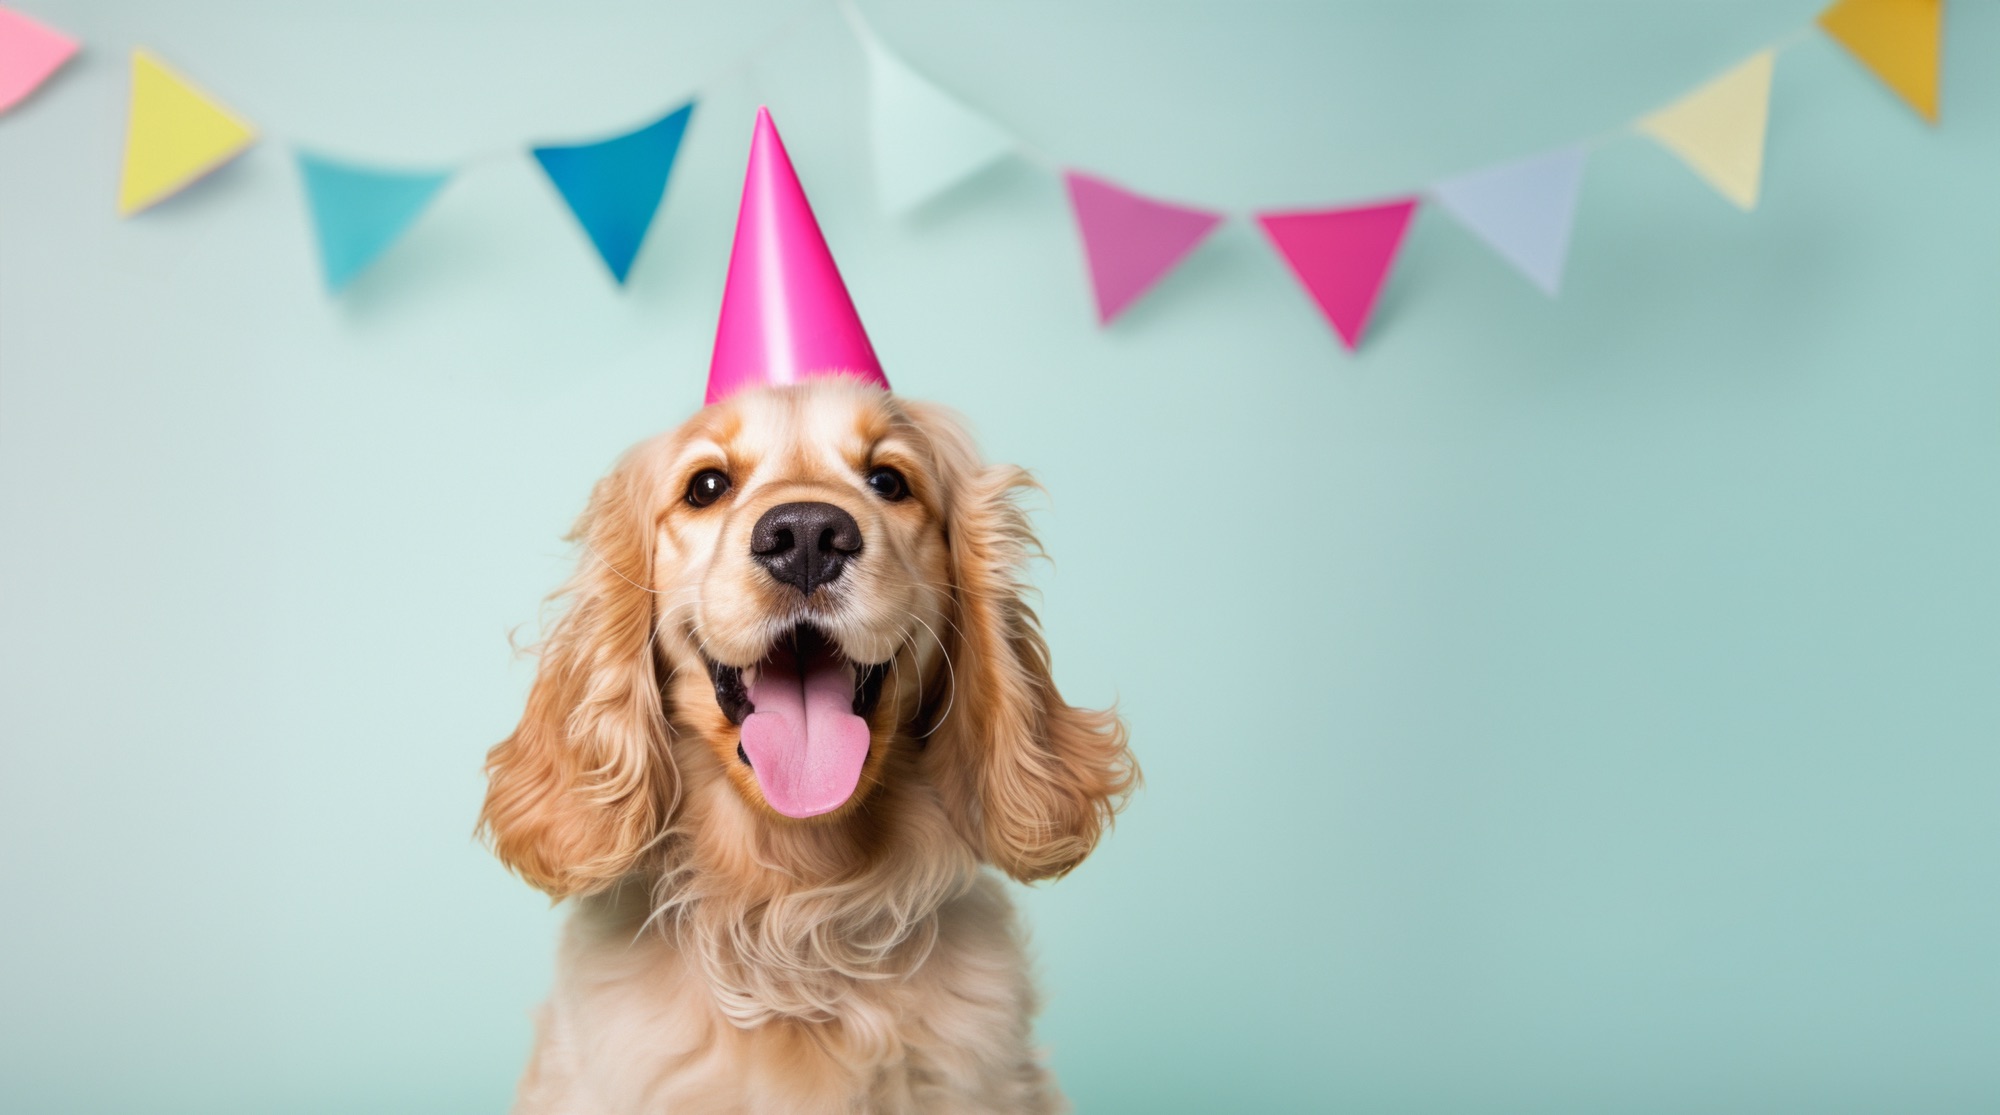 14 Ways to Celebrate: Because Dogs Love a Party Too